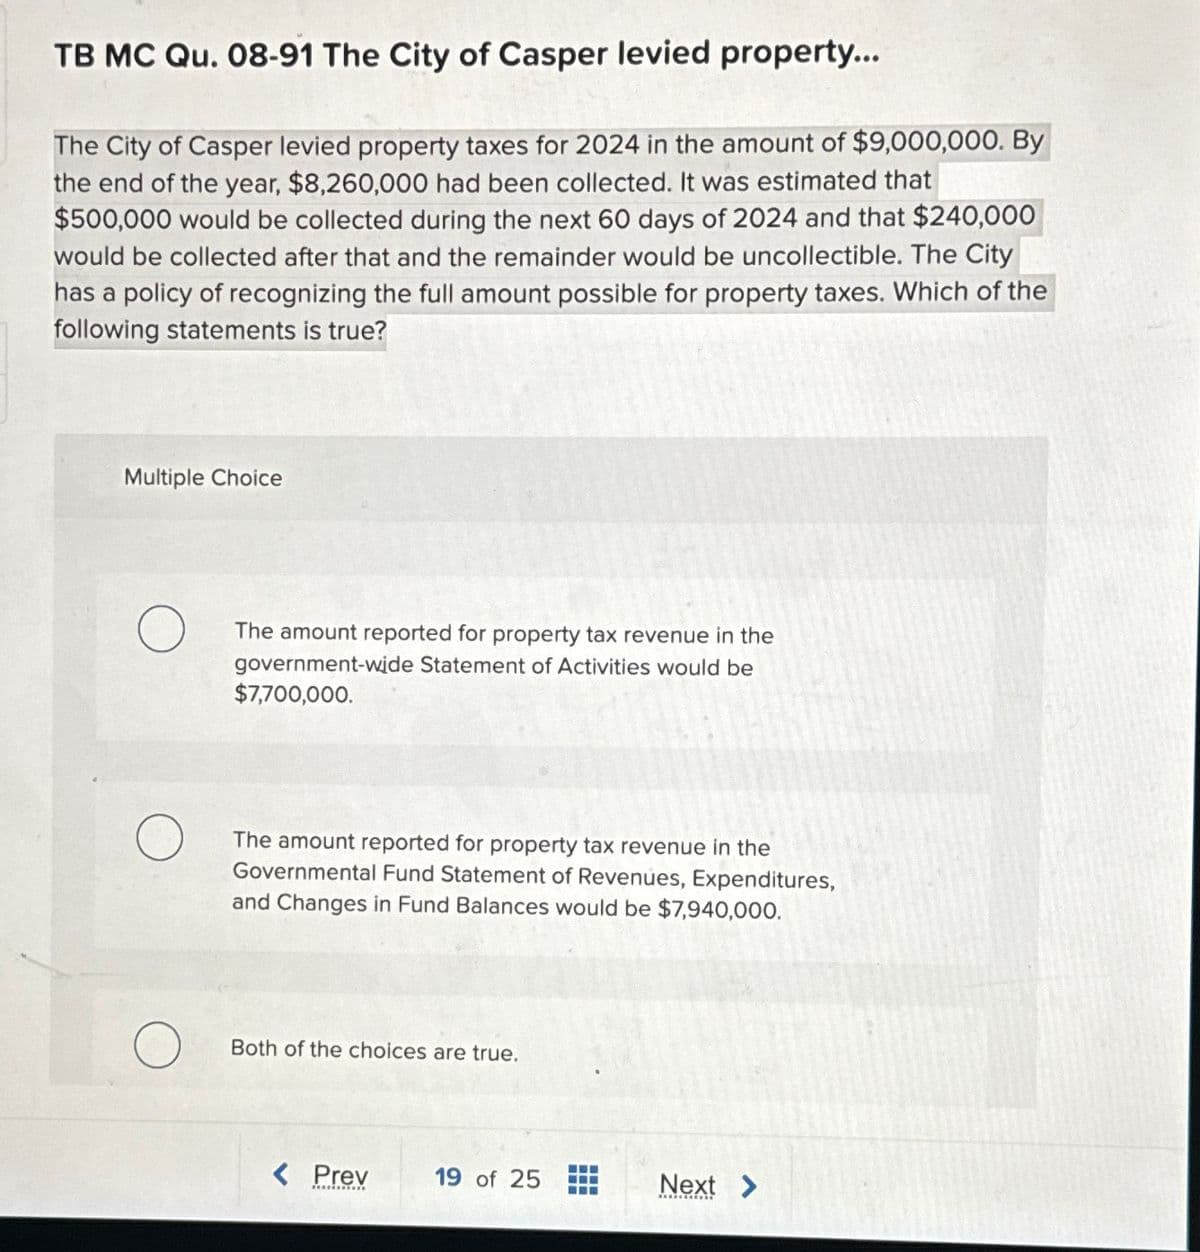 TB MC Qu. 08-91 The City of Casper levied property...
The City of Casper levied property taxes for 2024 in the amount of $9,000,000. By
the end of the year, $8,260,000 had been collected. It was estimated that
$500,000 would be collected during the next 60 days of 2024 and that $240,000
would be collected after that and the remainder would be uncollectible. The City
has a policy of recognizing the full amount possible for property taxes. Which of the
following statements is true?
Multiple Choice
The amount reported for property tax revenue in the
government-wide Statement of Activities would be
$7,700,000.
The amount reported for property tax revenue in the
Governmental Fund Statement of Revenues, Expenditures,
and Changes in Fund Balances would be $7,940,000.
Both of the choices are true.
< Prev
19 of 25
Next